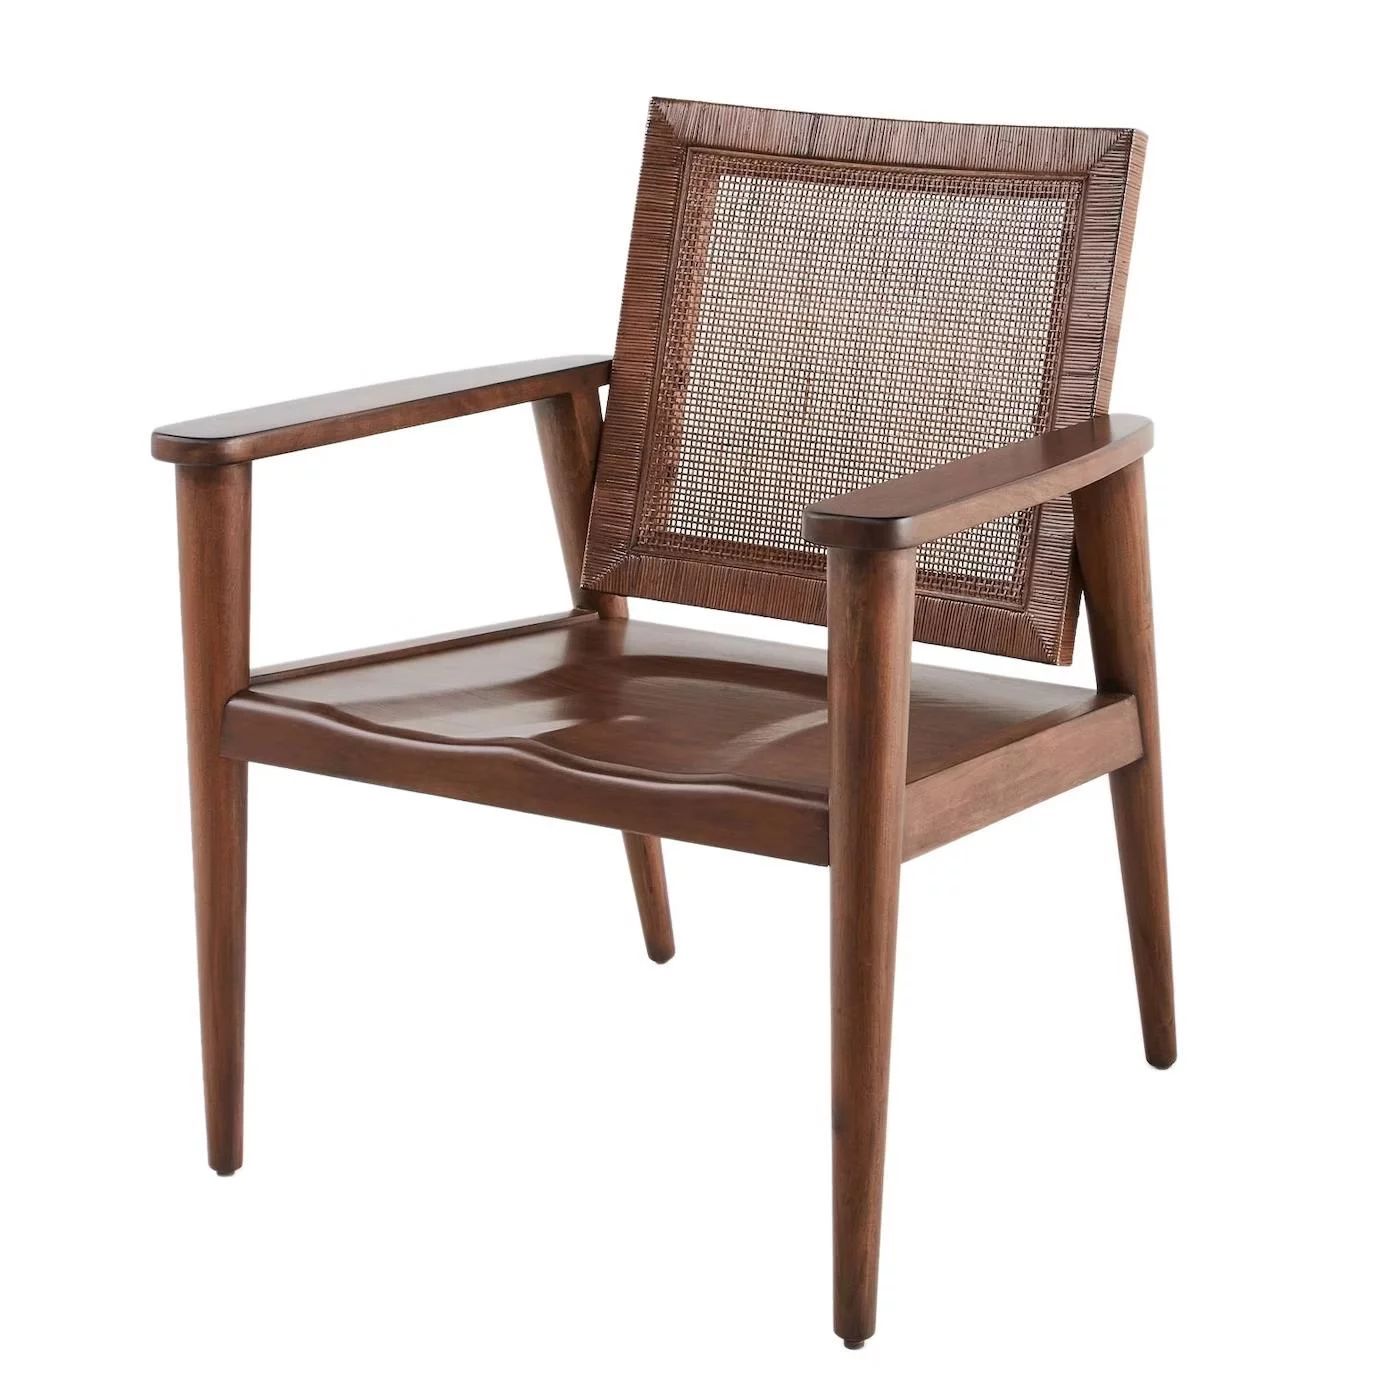 Wood with Cane Back Accent Chair, Brown Color, Living Room or Study - Hearth & Hand with Magnolia | Walmart (US)